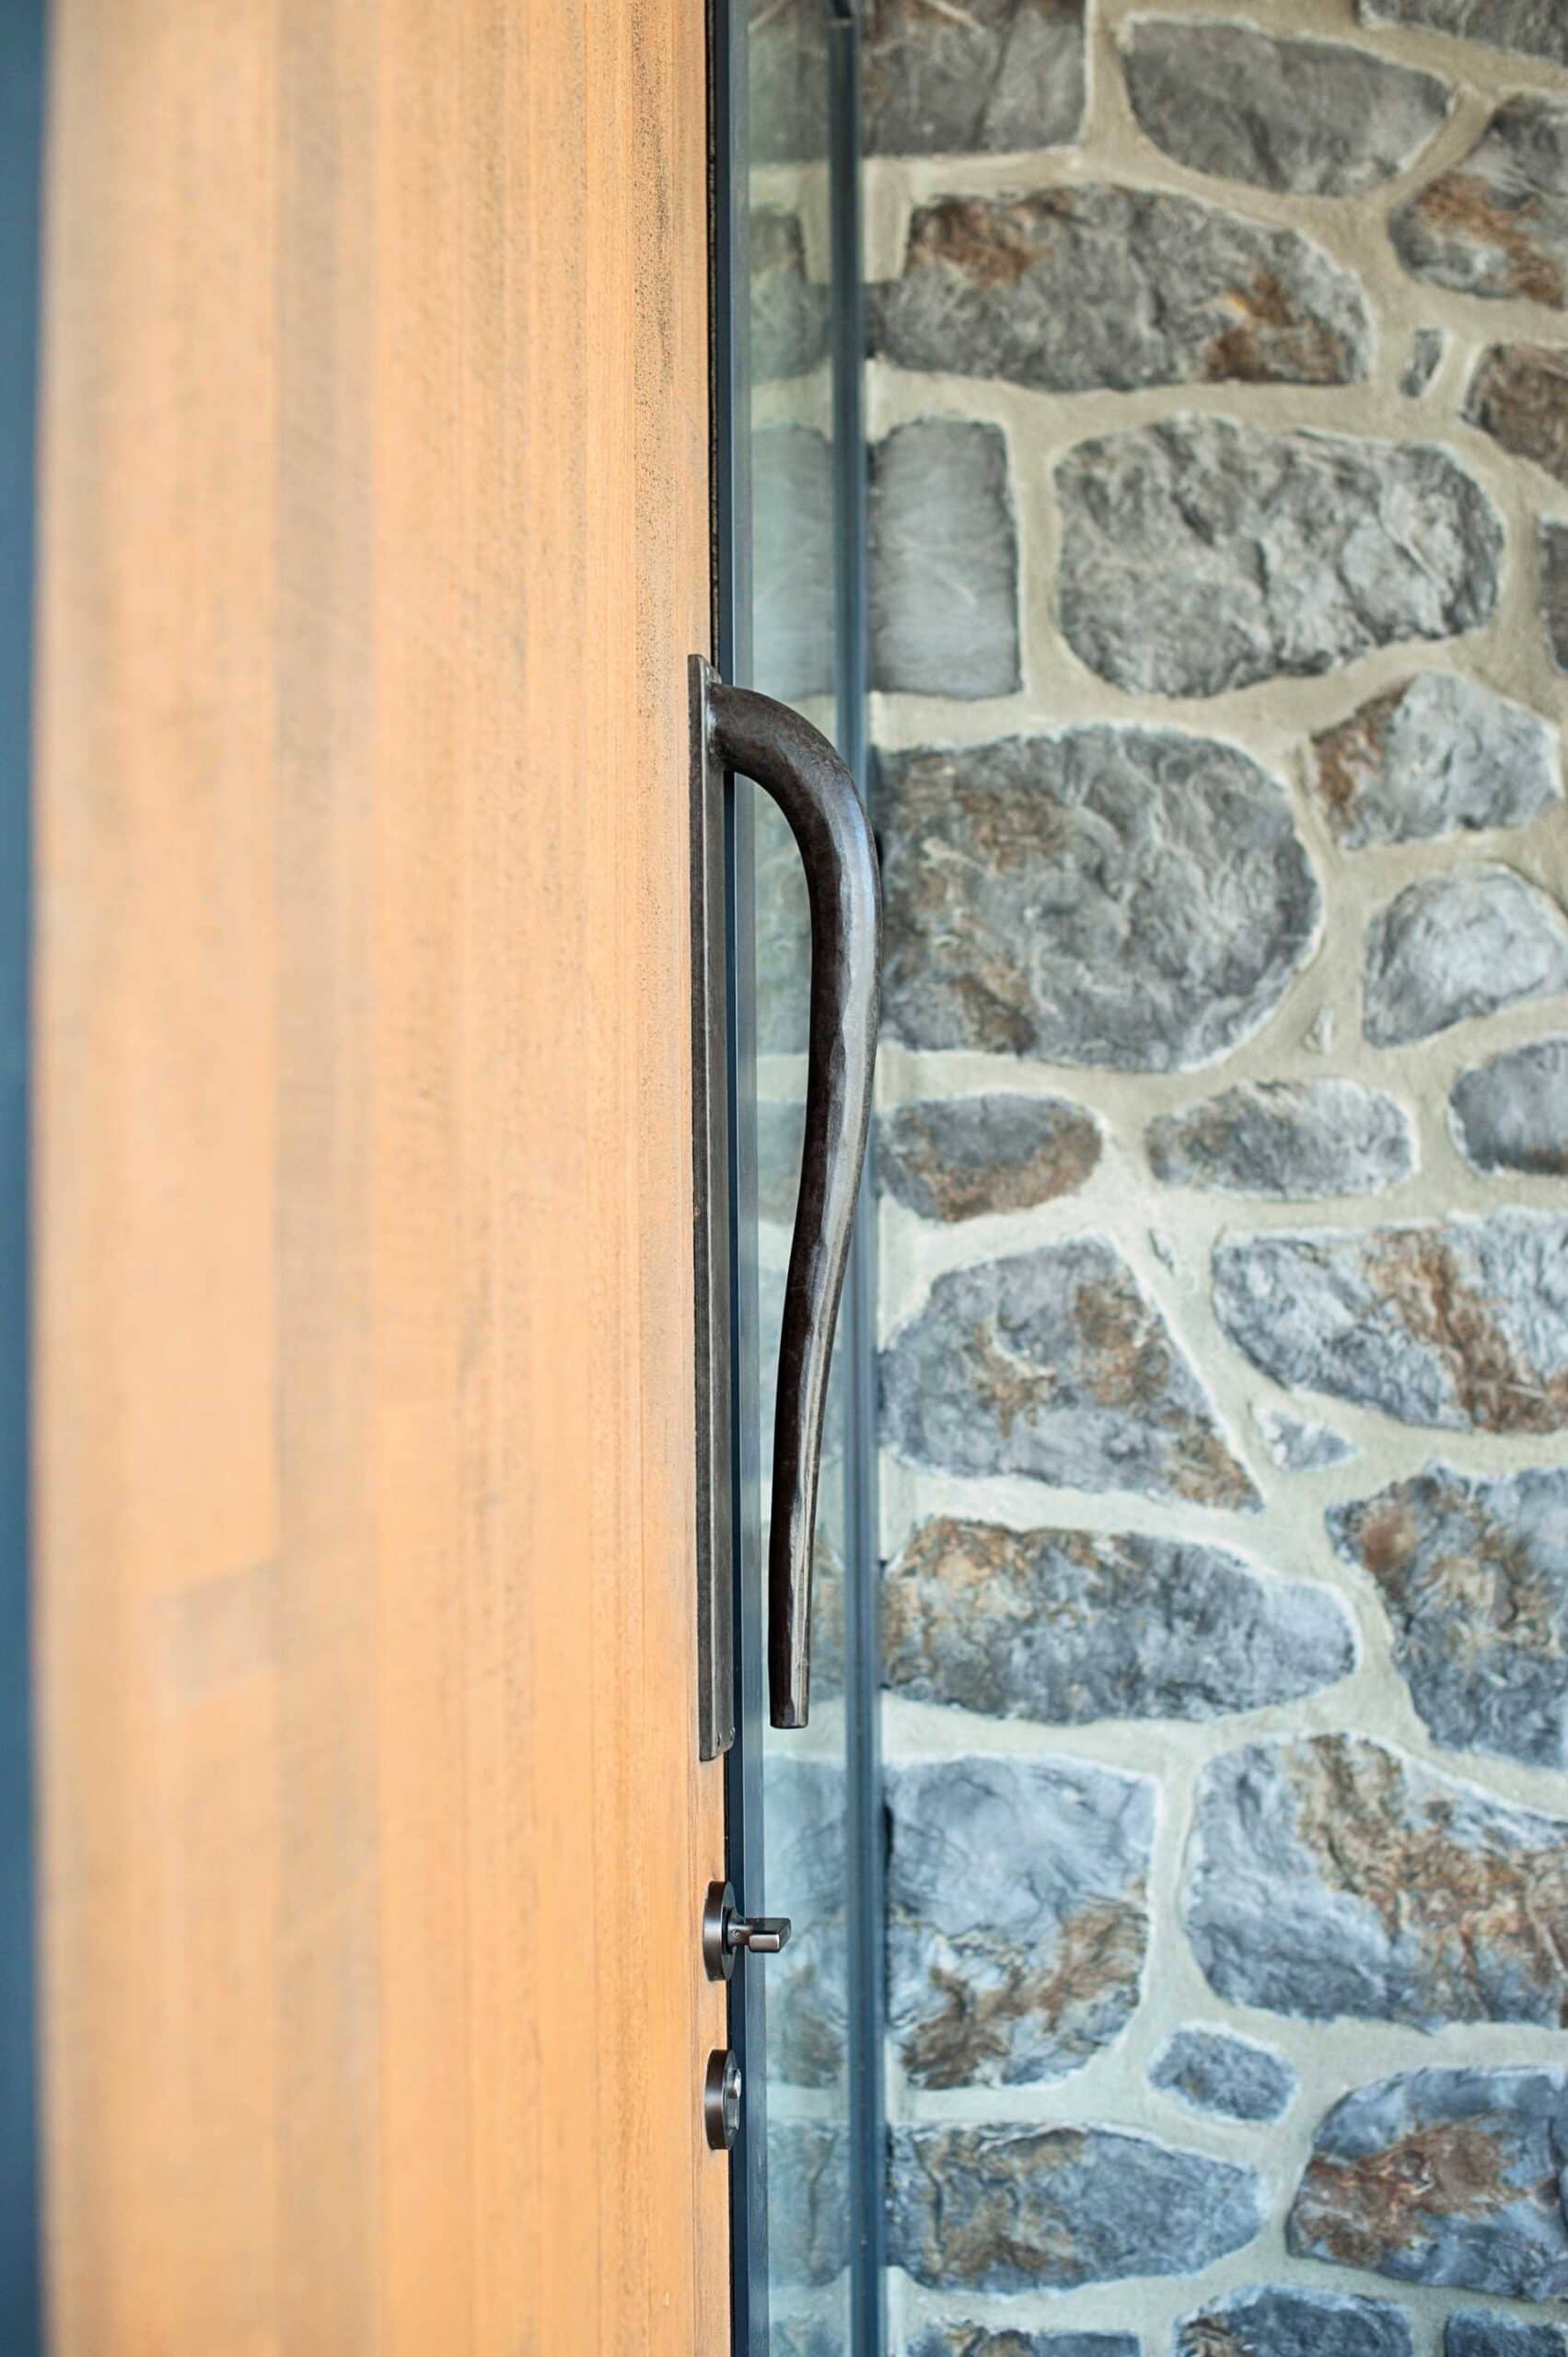  These hand forged handles were made by Tasman Forge for the front doors